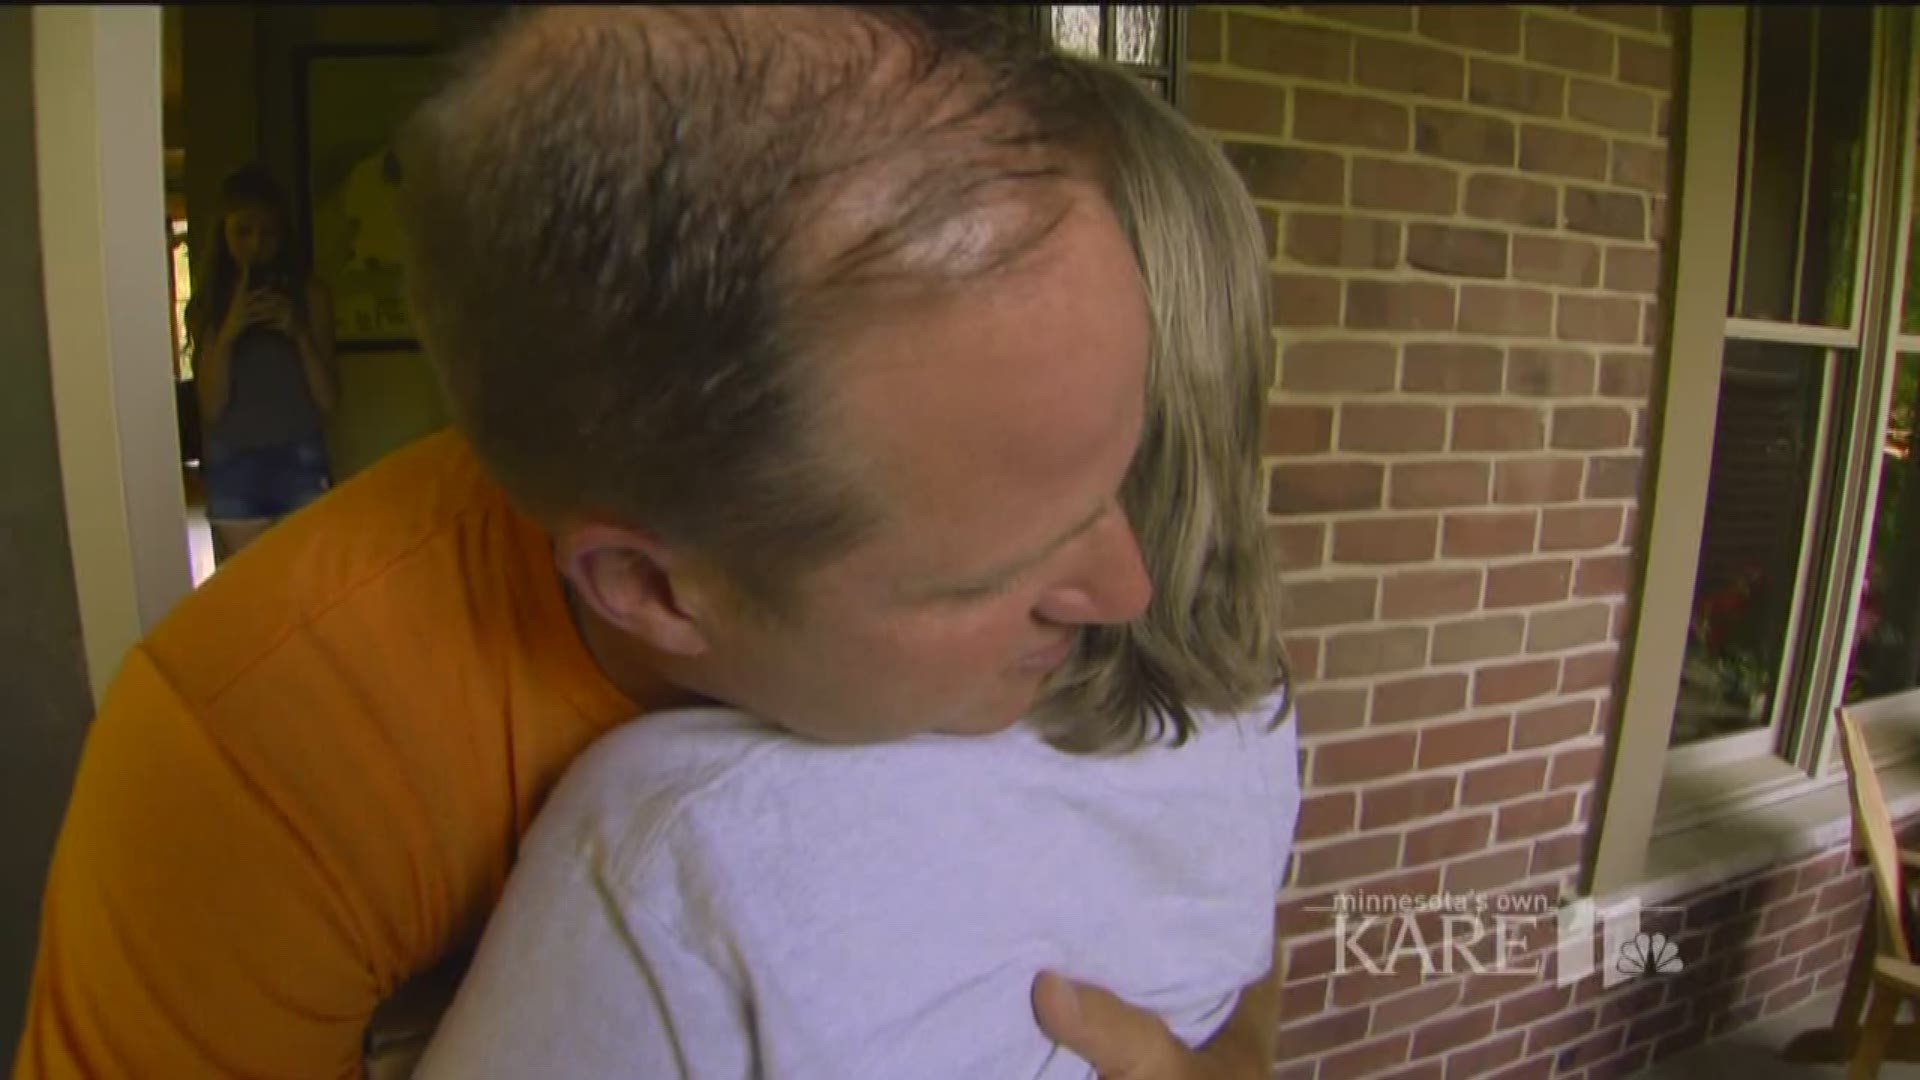 Michelle Hayes drove from Texas to Minnesota to meet the stranger who saved her life. http://kare11.tv/2tZJYdX